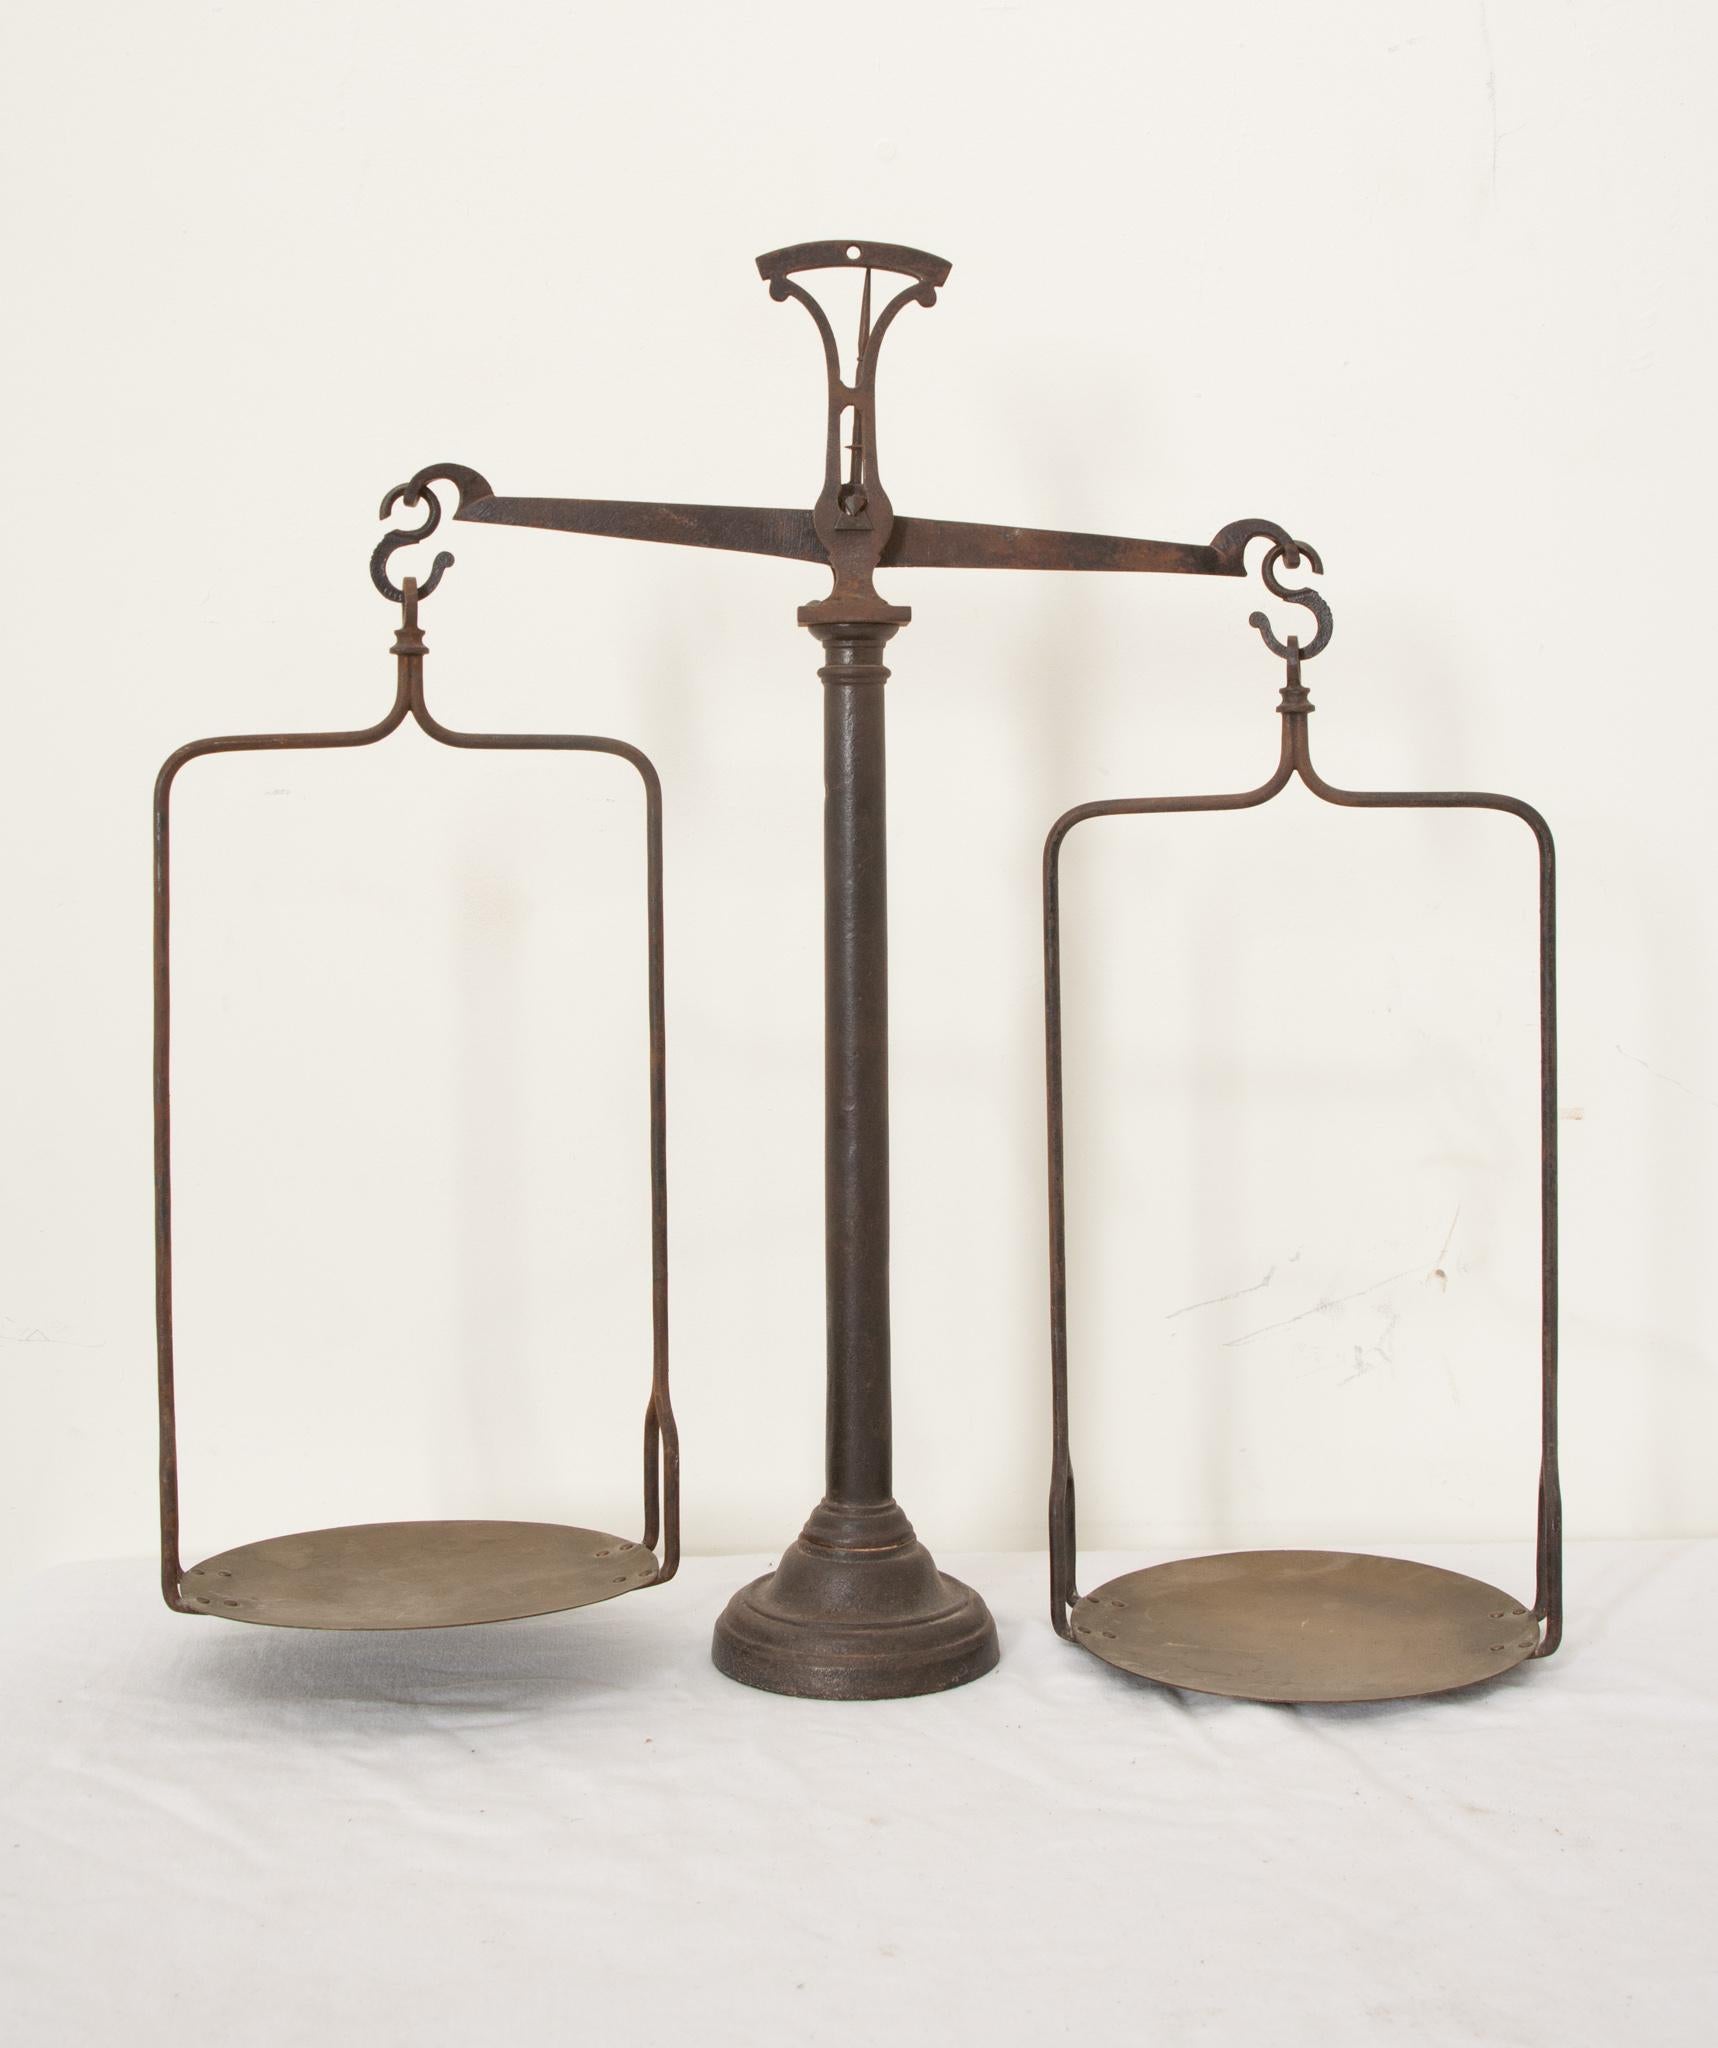 A smart French metal hanging balance scale from the 1900’s. Two straight stirrups hang from the arms with round brass dishes that hold the weighted item in one, and counterweights in the other. The scale has a column shaft, with a circular plinth